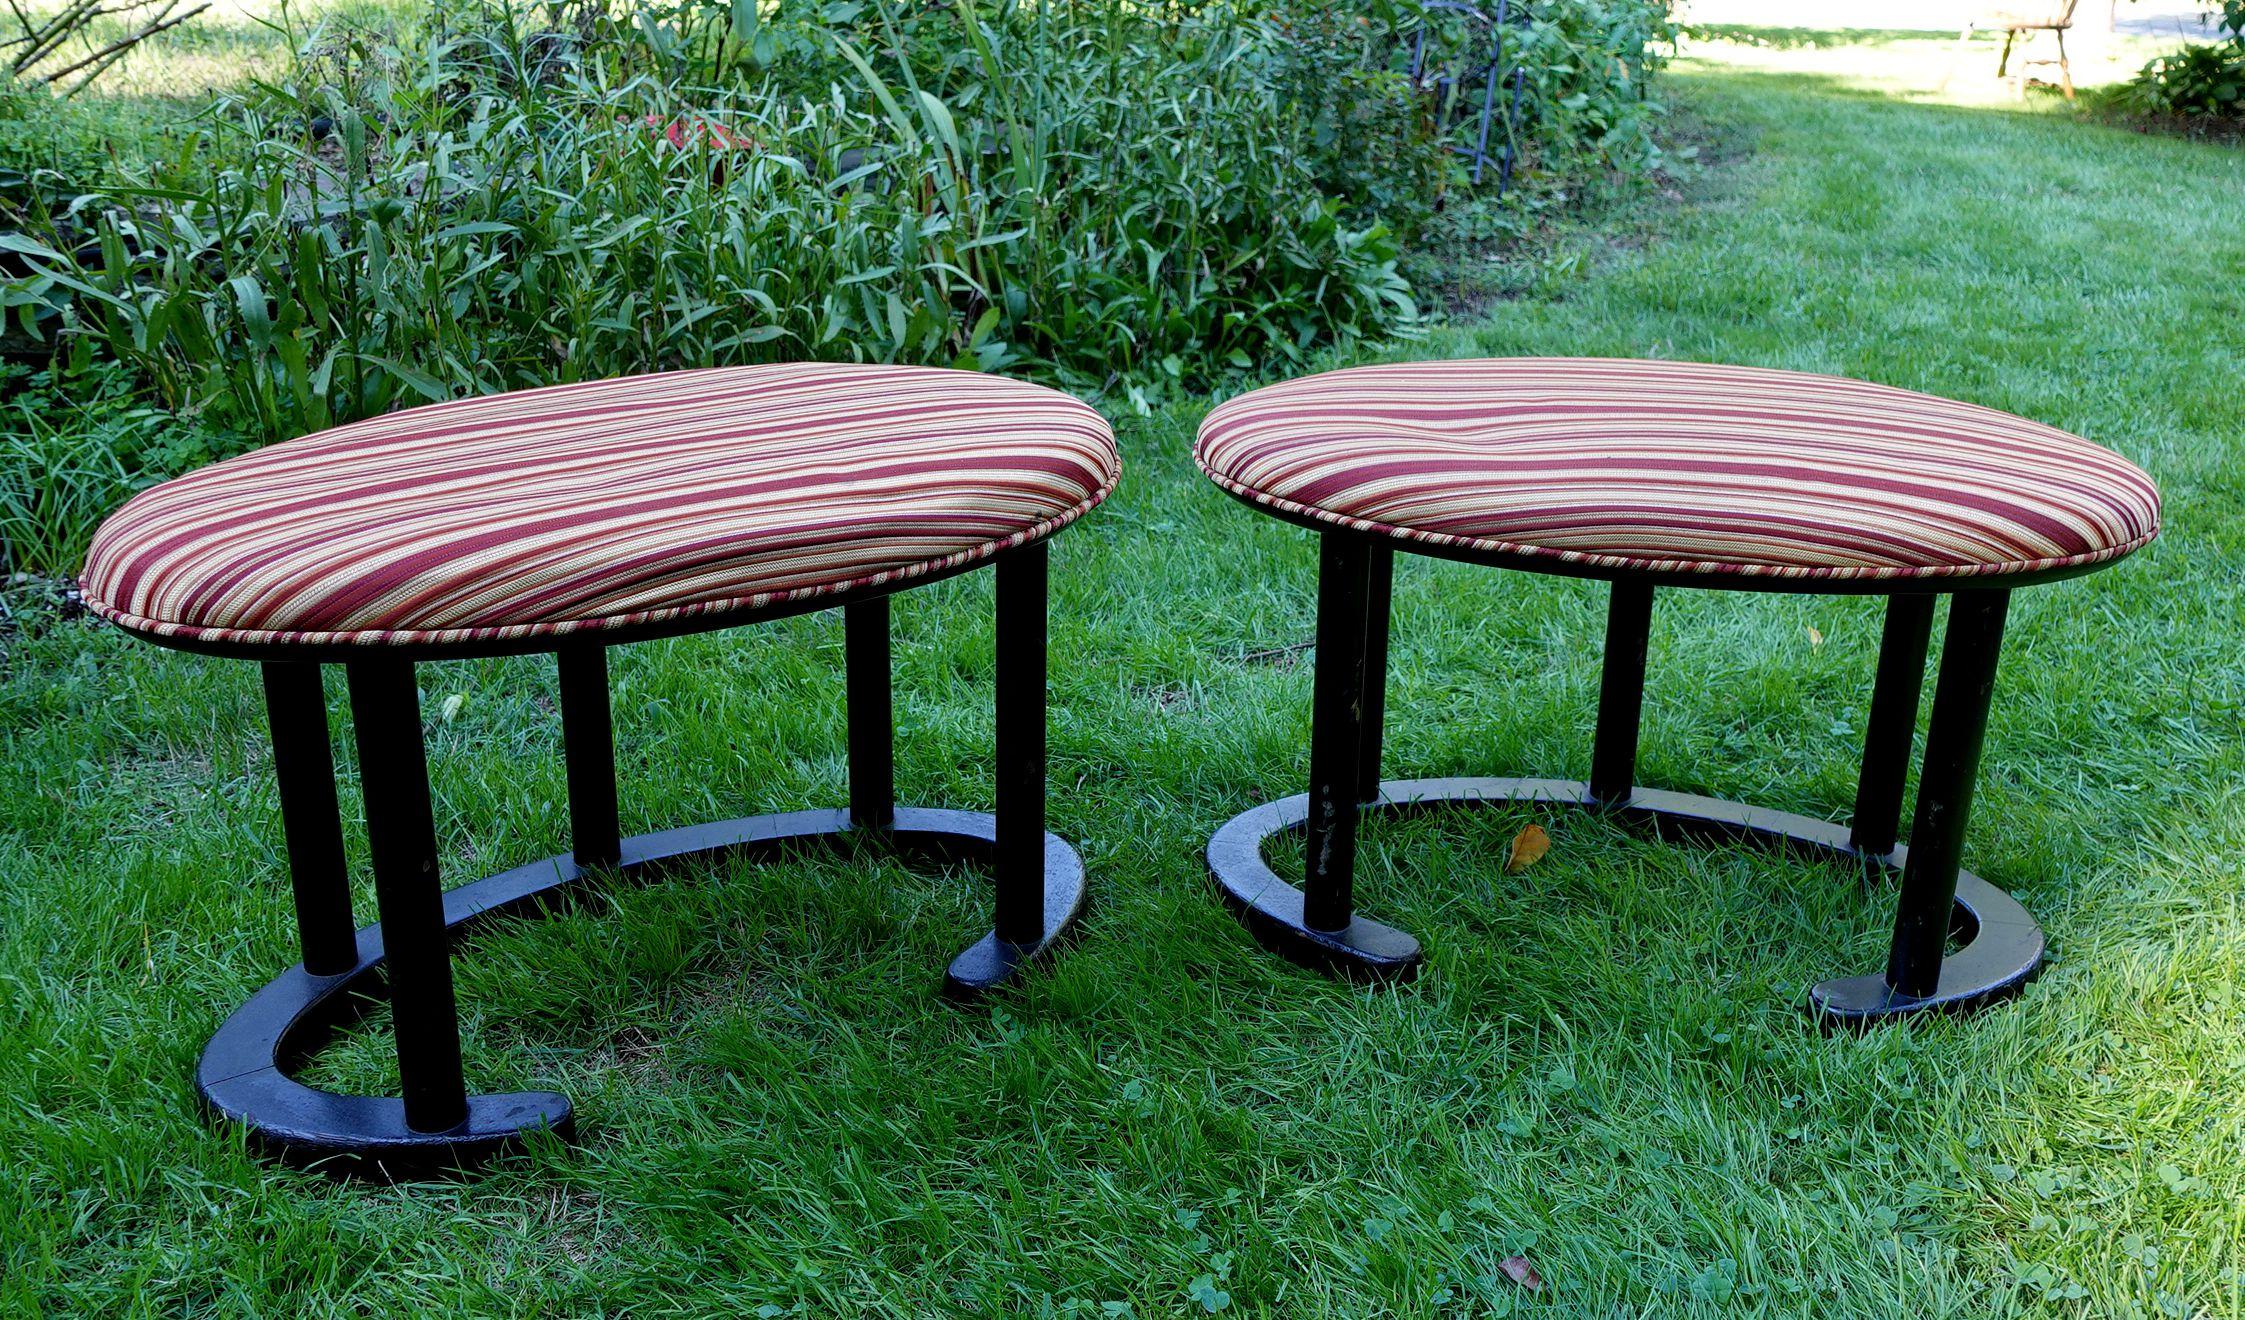 Pair of mid-century wooden stools.
Measures: 15 inches H, top 14